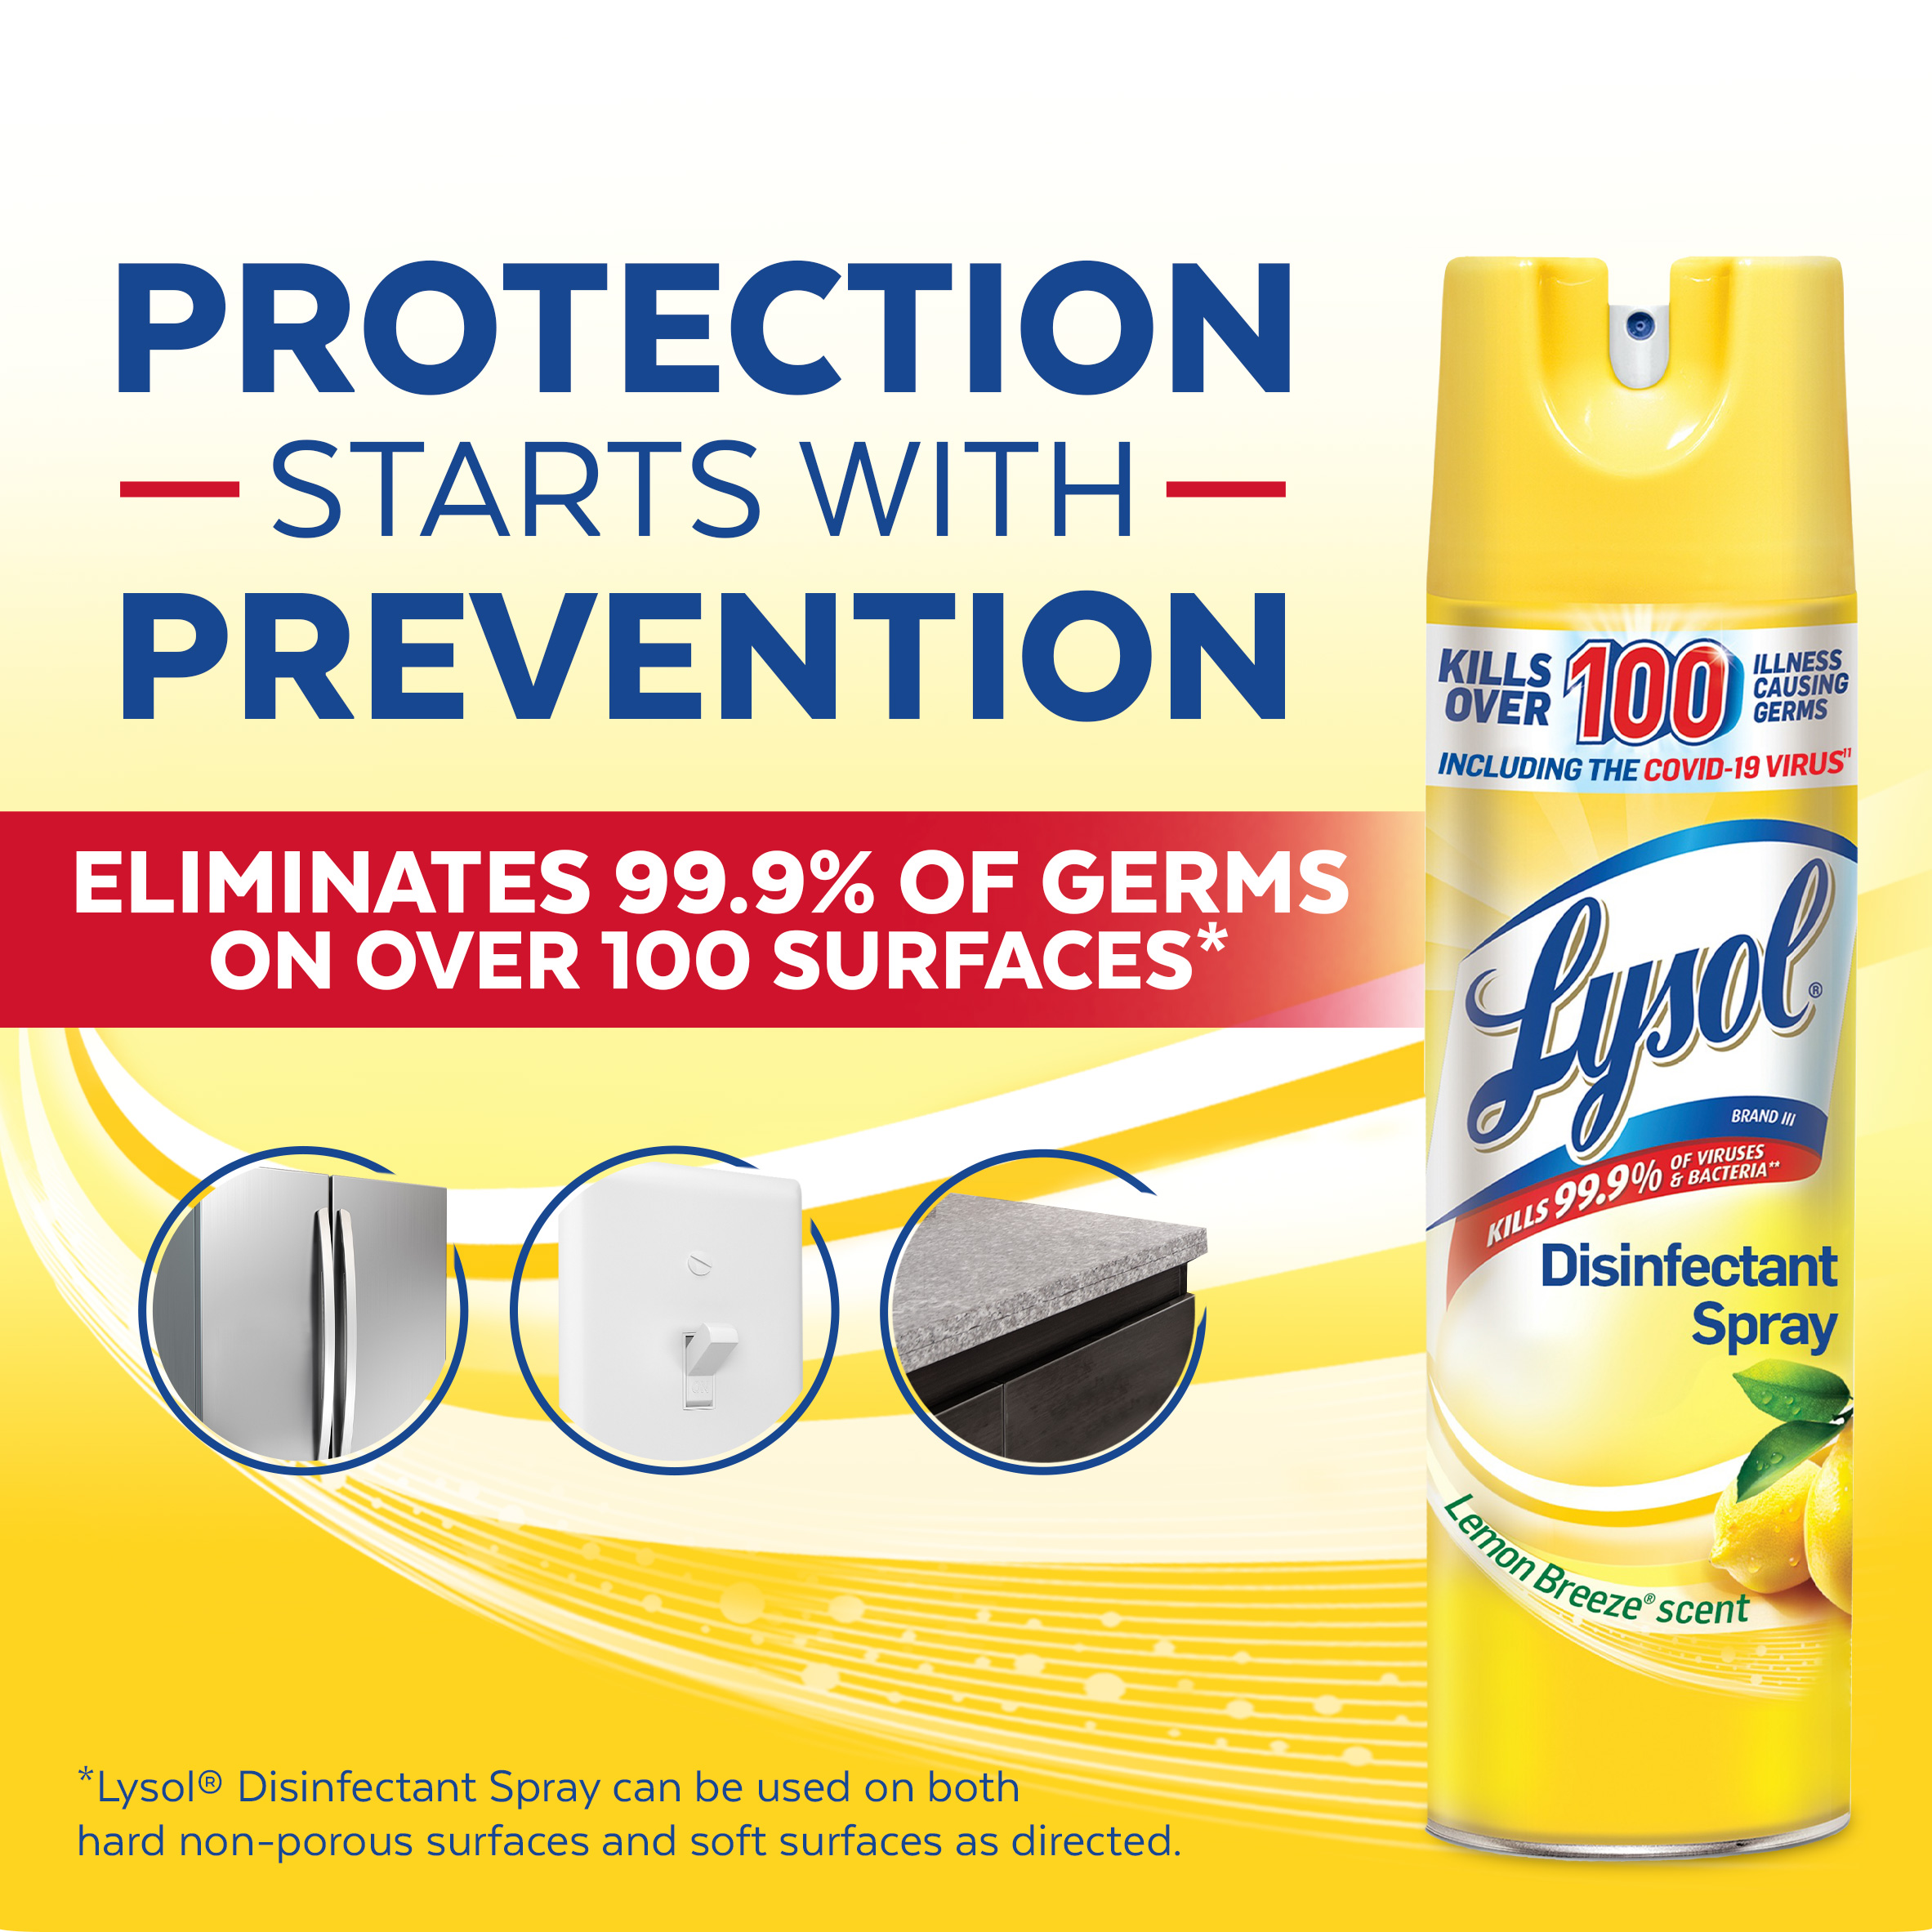 Lysol Disinfectant Spray, Lemon Breeze, 19oz, Tested and Proven to Kill COVID-19 Virus, Packaging May Vary​ - image 5 of 9